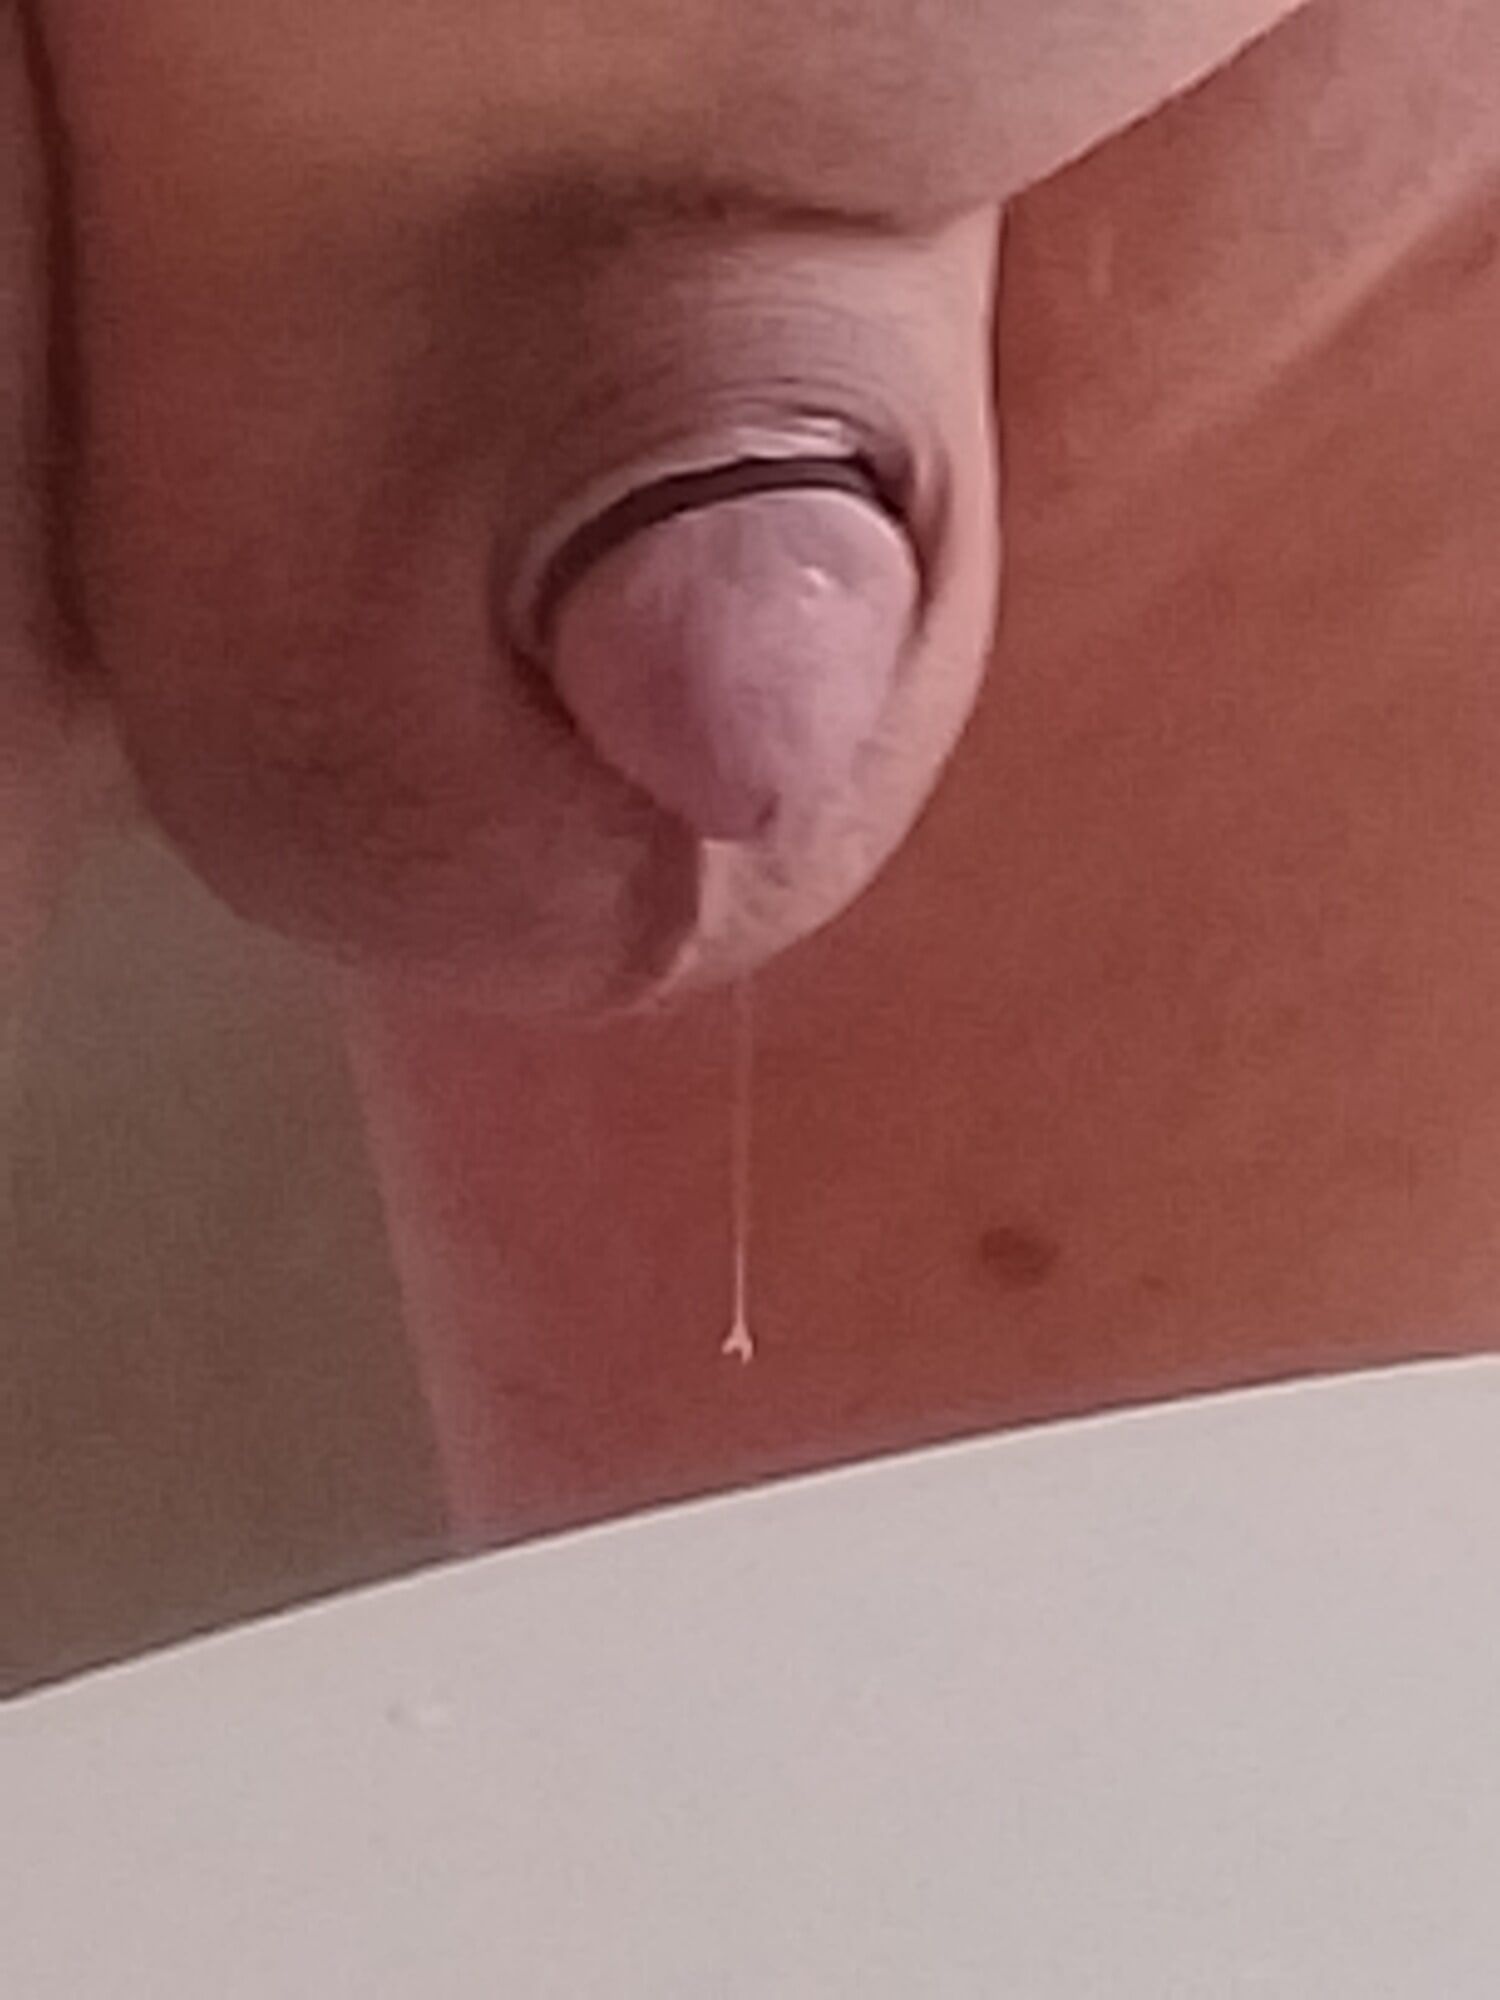 Exposed clitty dripping #5